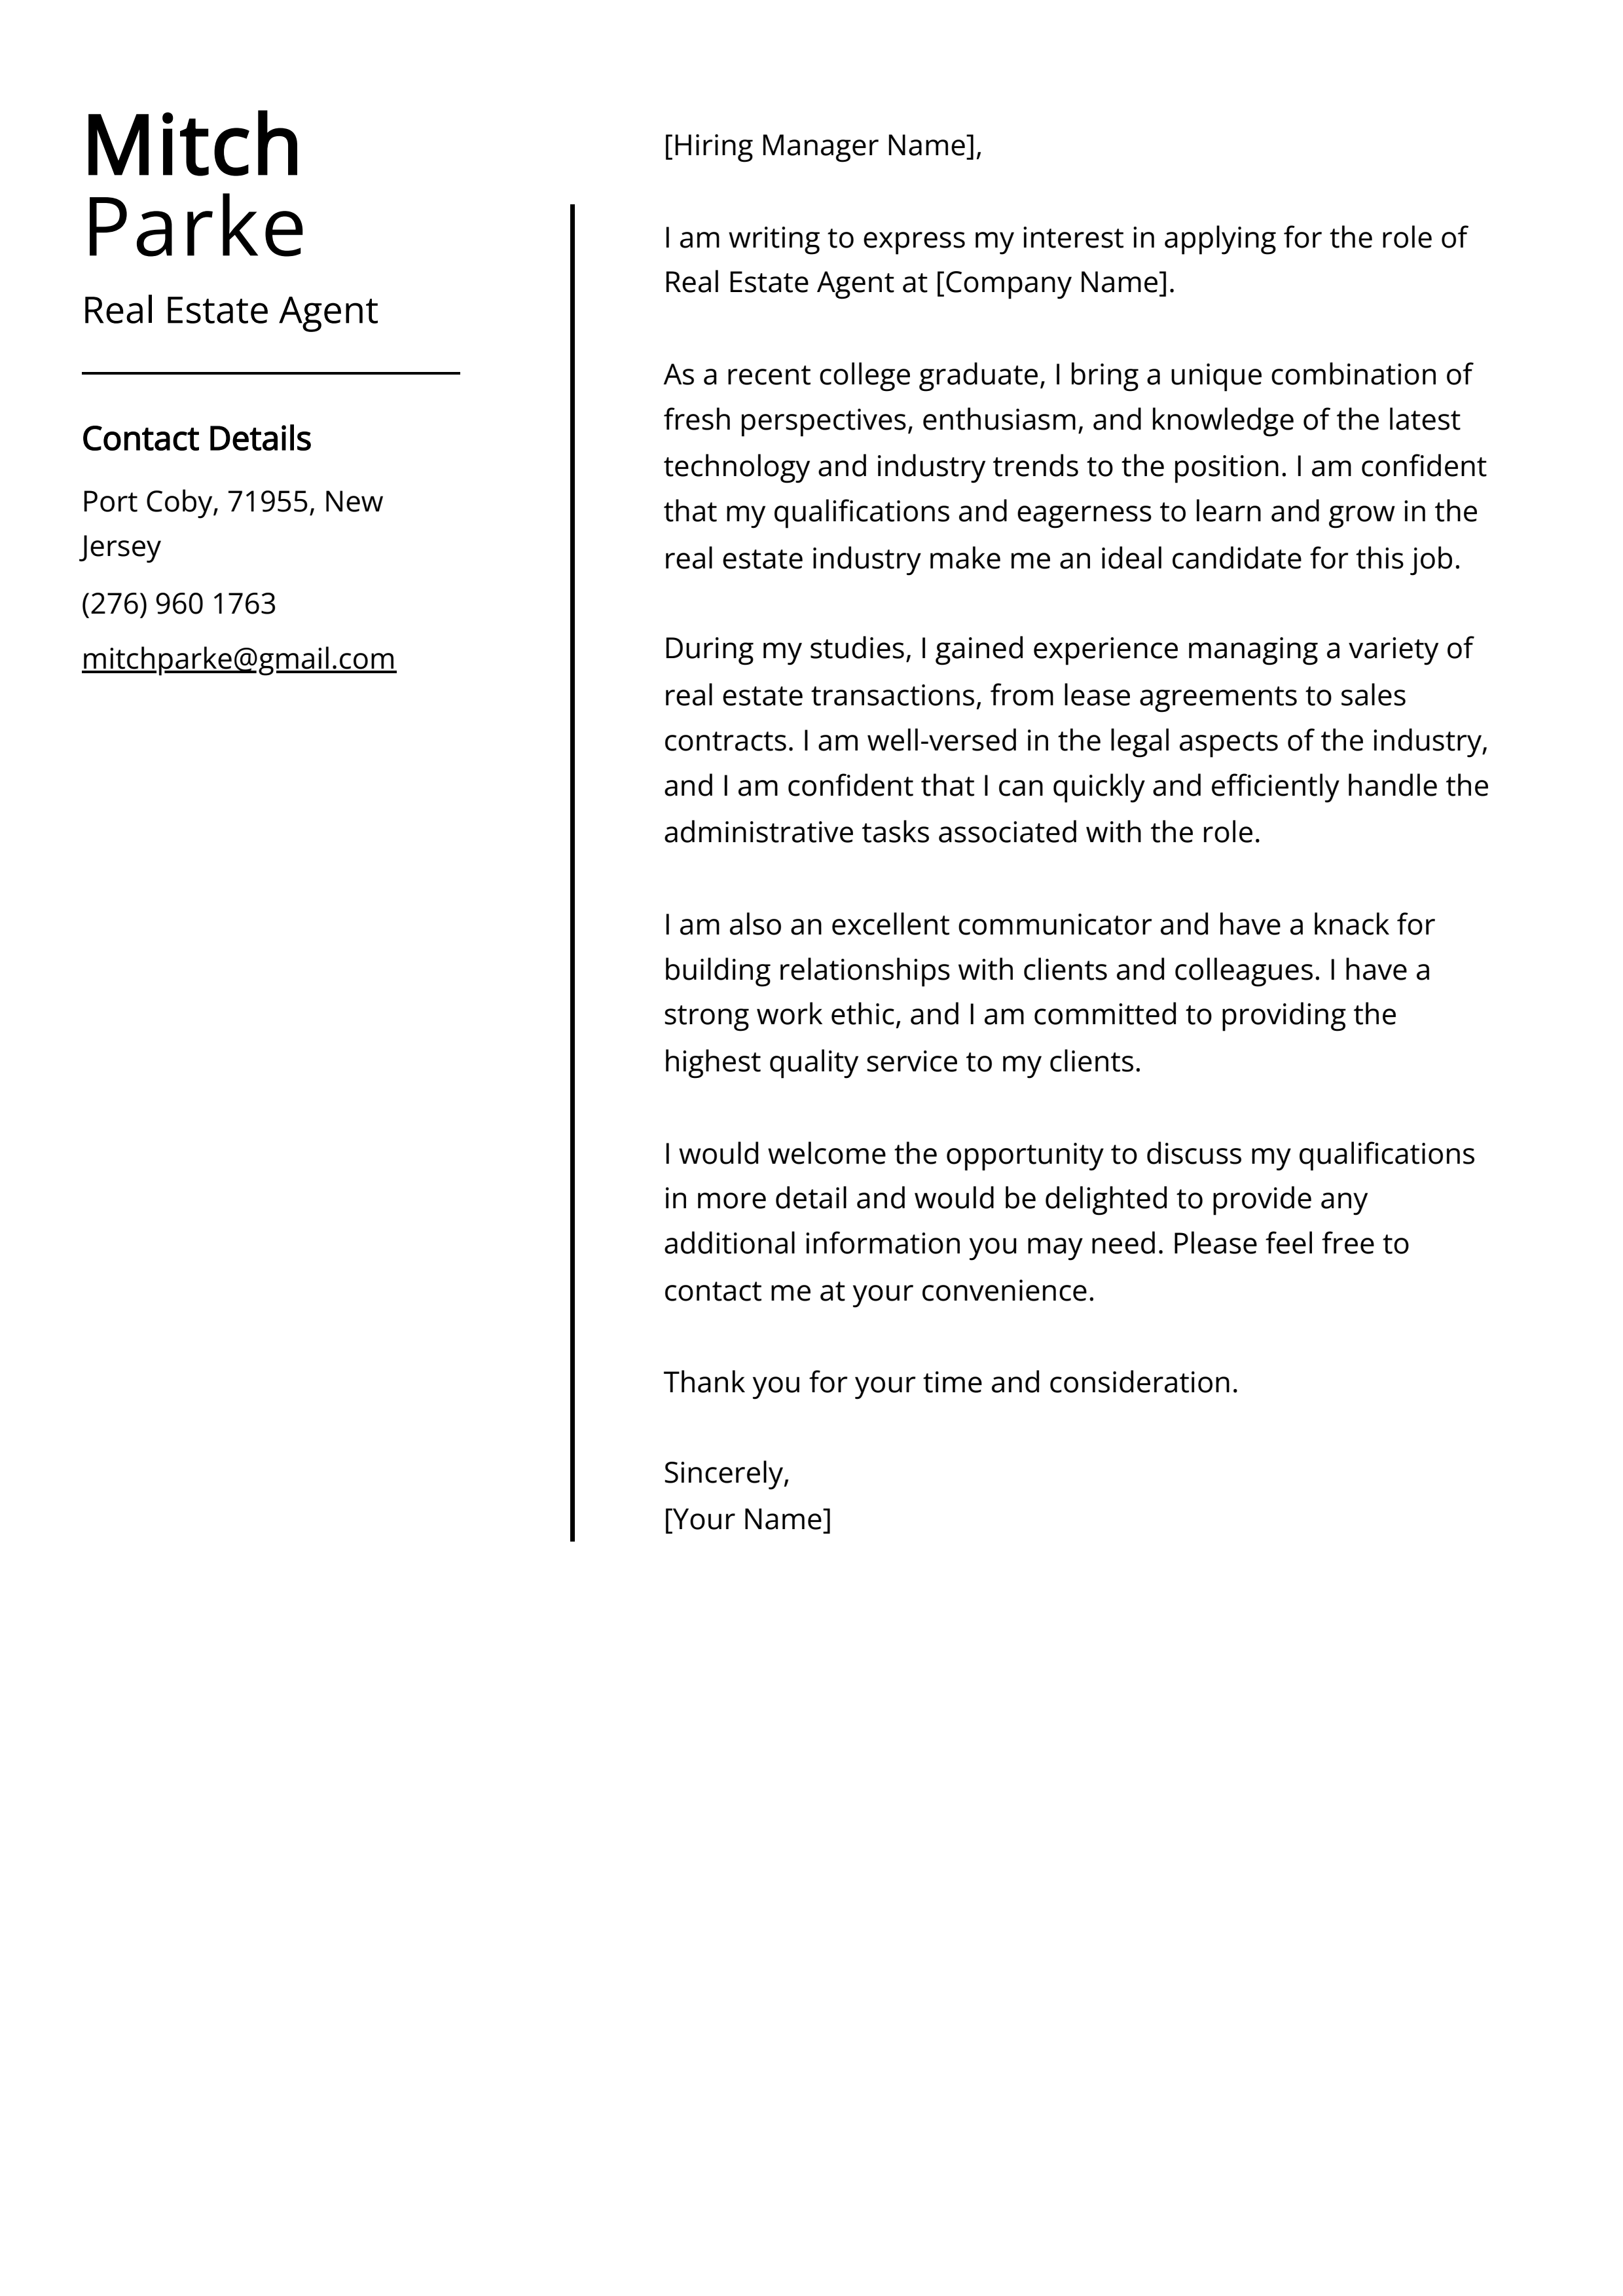 Experienced Real Estate Agent Cover Letter Example